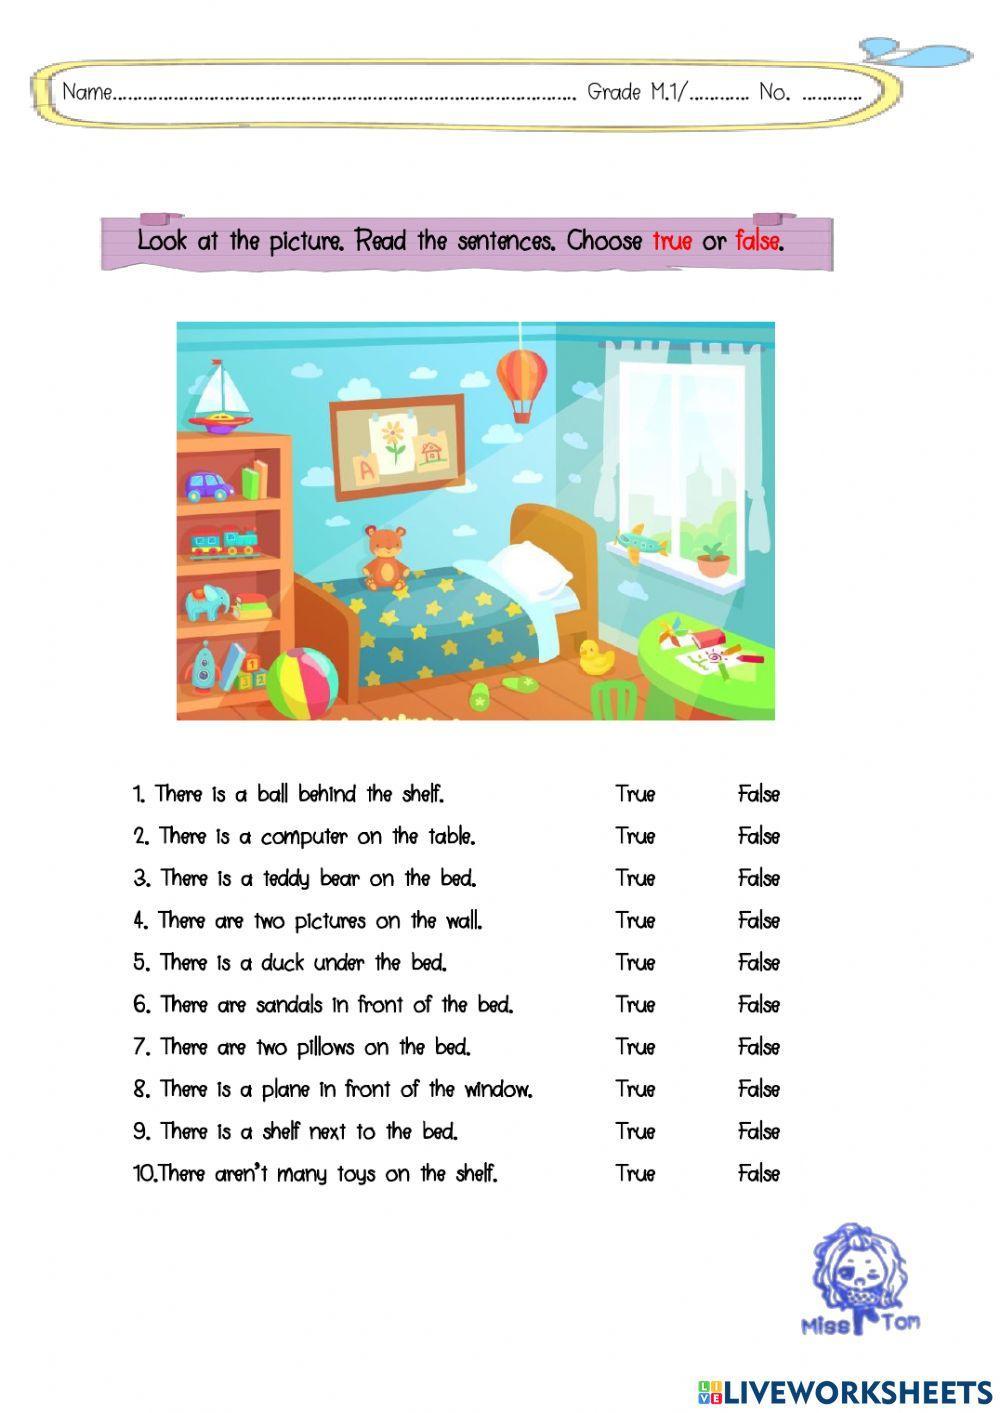 Look at the picture. Read the sentences. Choose true or false.